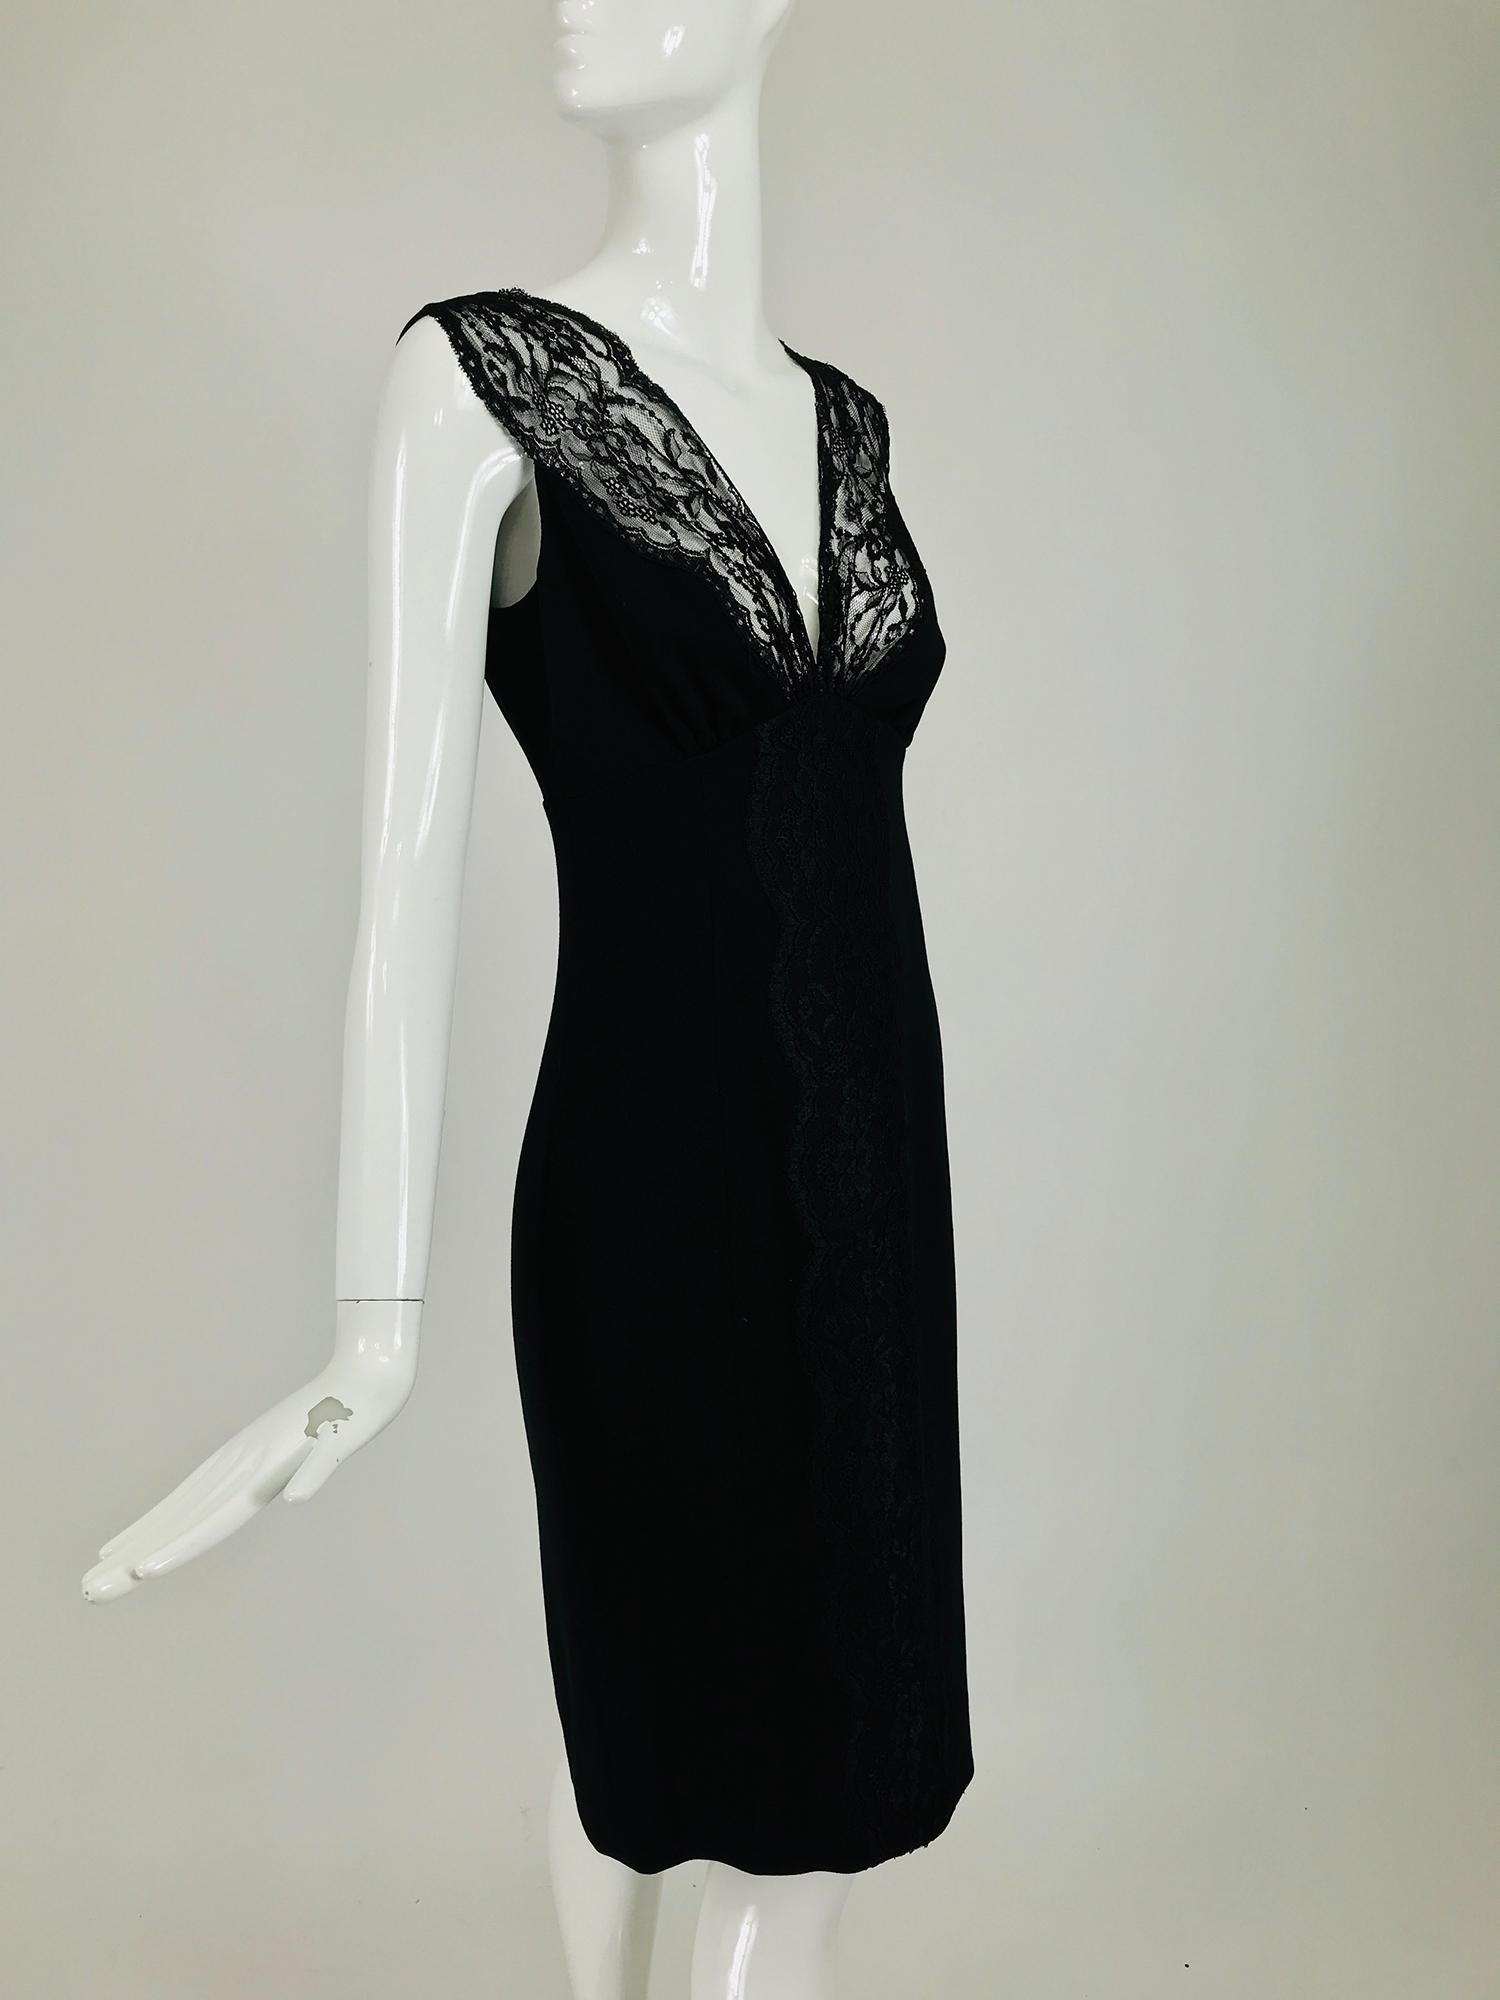 Valentino sleeveless black sheath with black lace décolletage. Plunge V bodice with unlined black lace facings, empire waist, the skirt is semi fitted. Back center hem vent. Black flat wool with some stretch. Fully lined in black acetate. Closes at